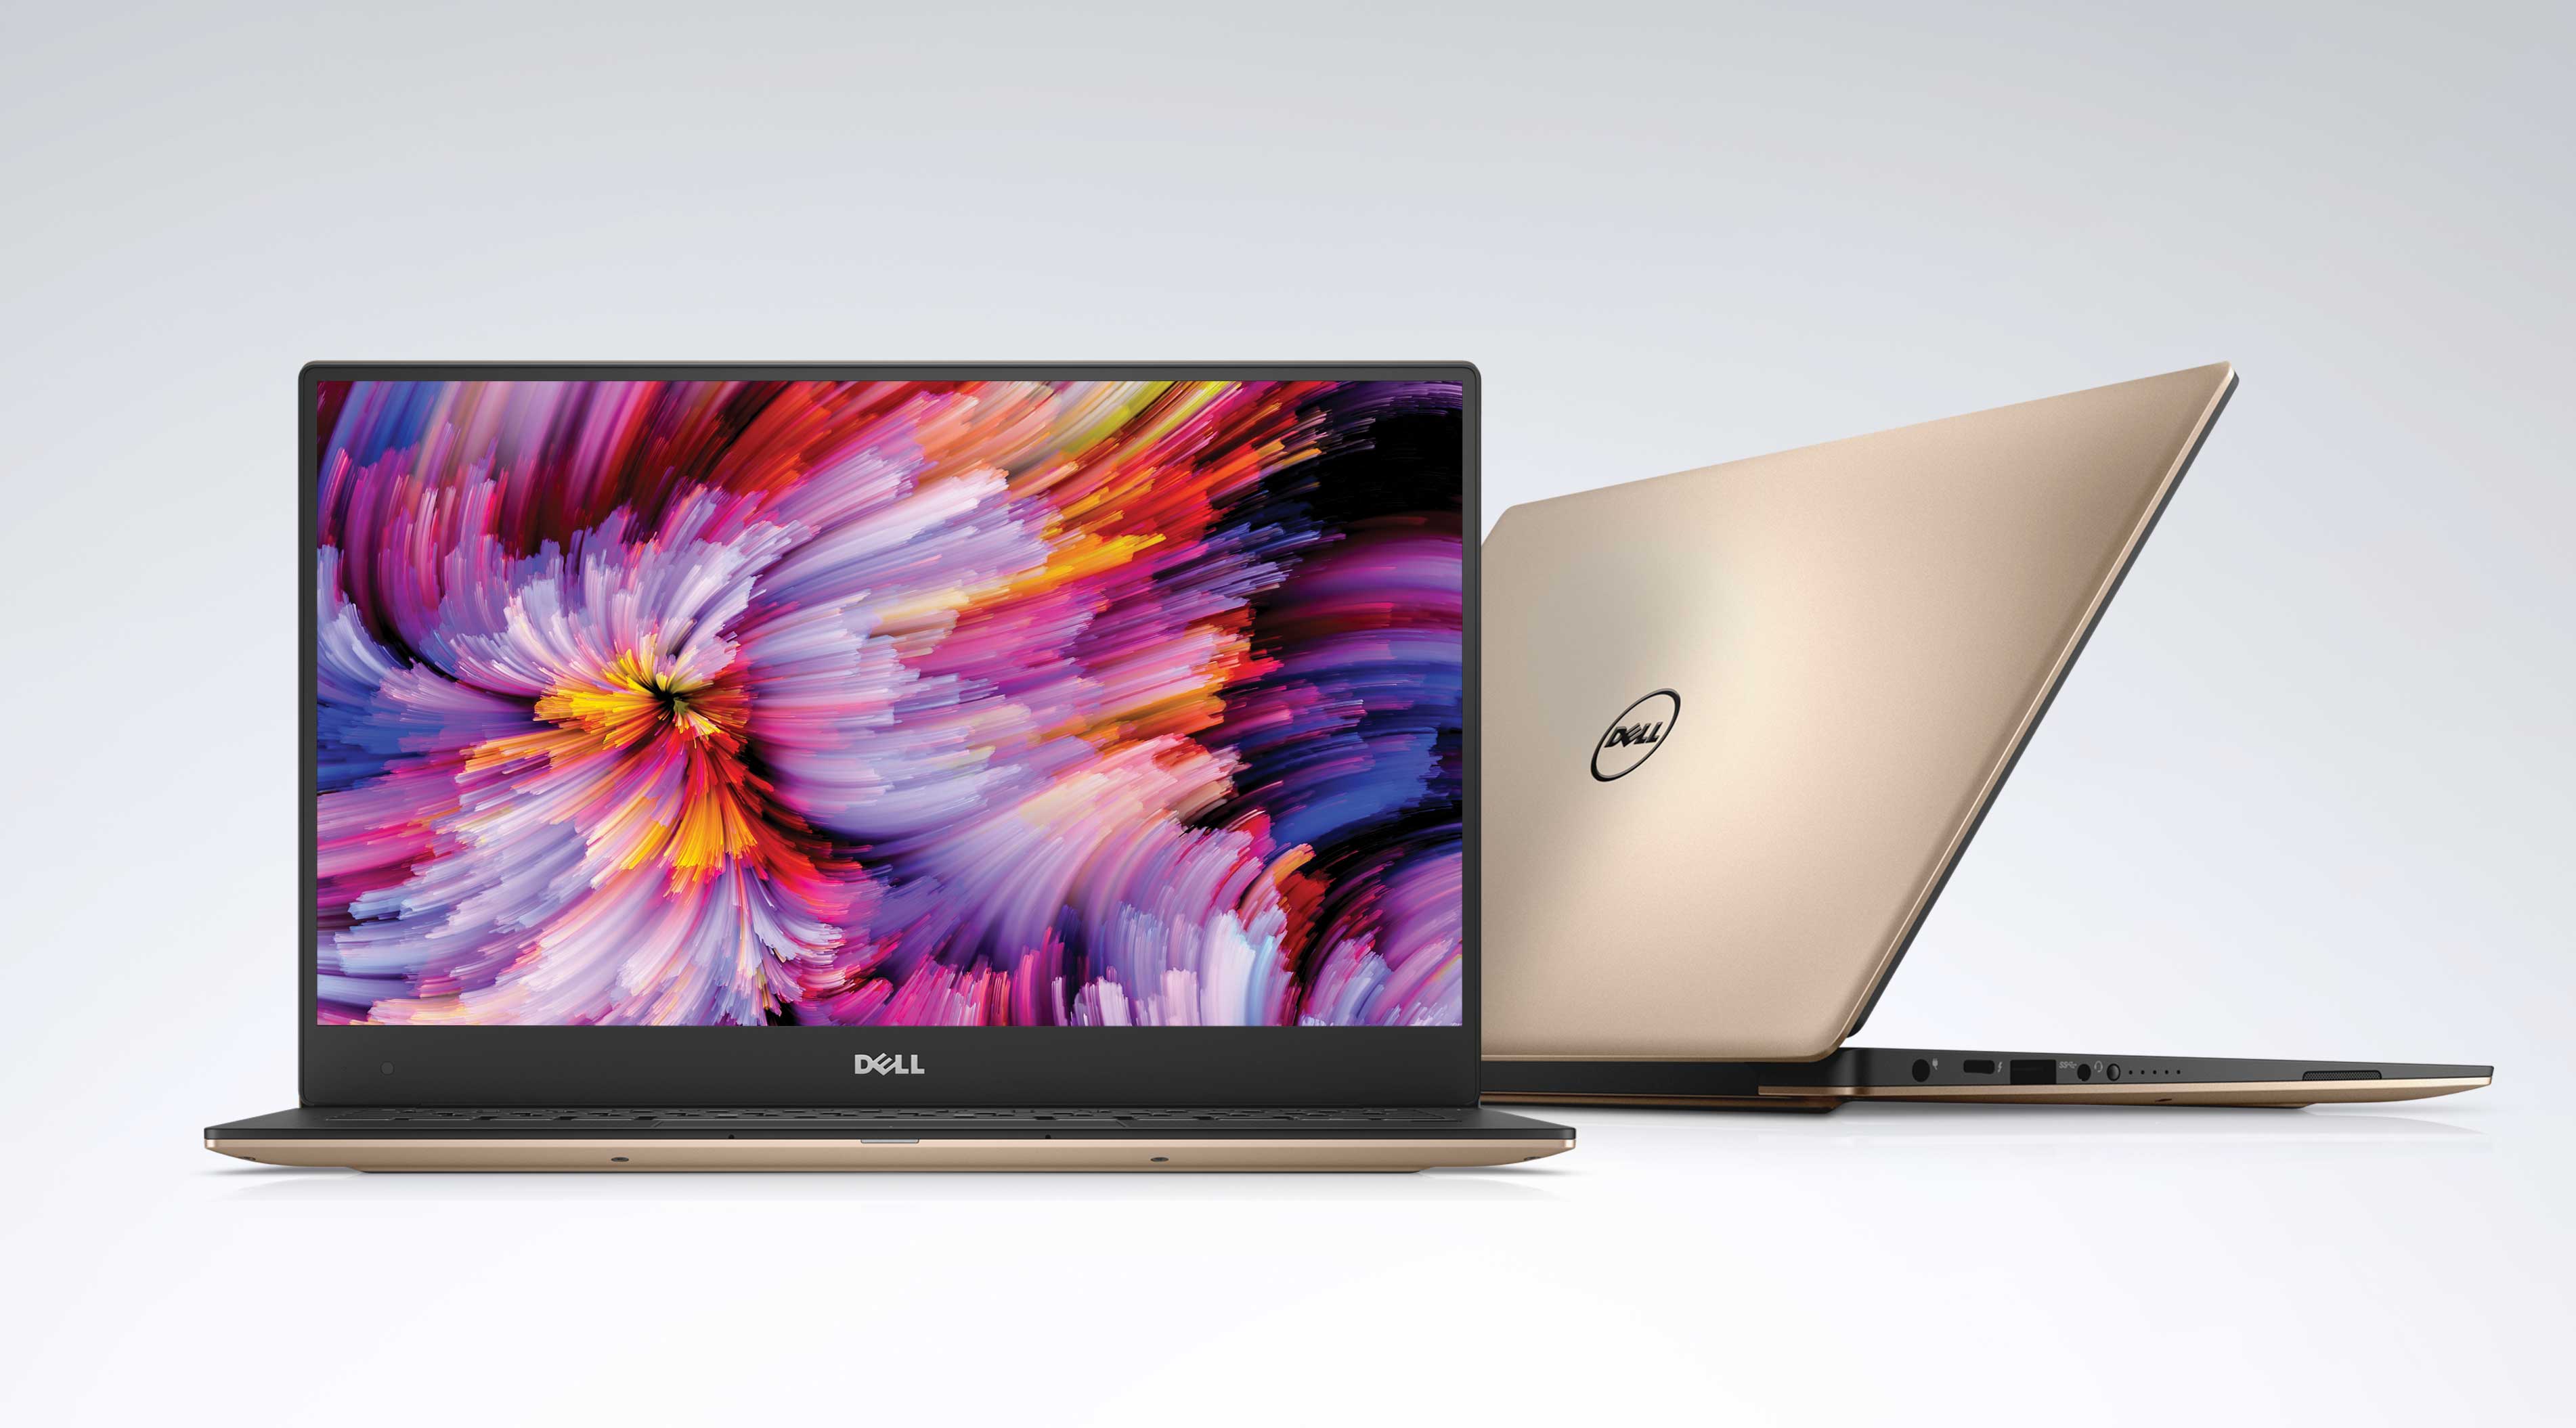 Dell XPS 13 laptop powered by Windows 10